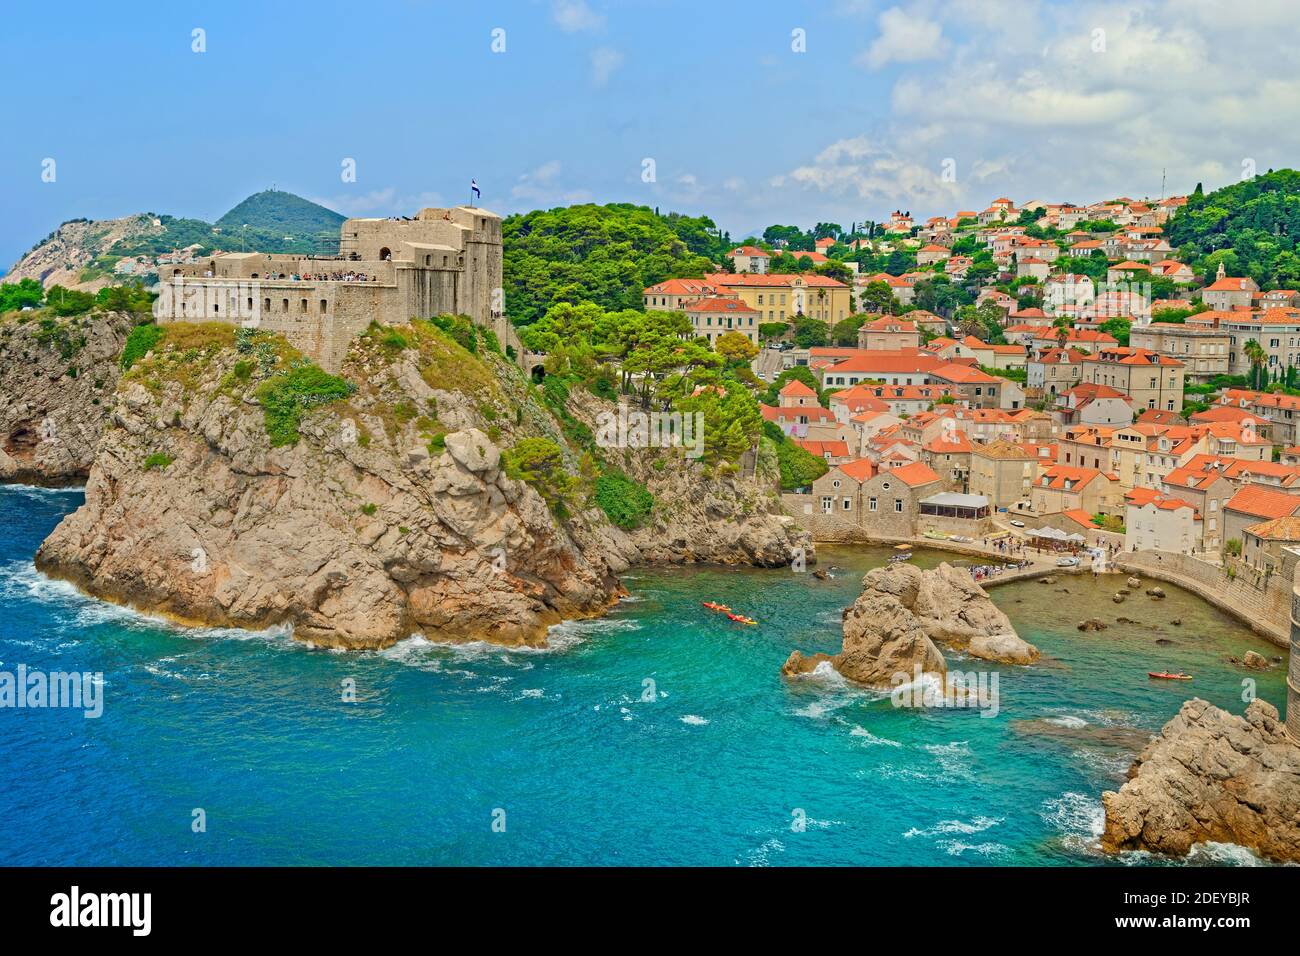 West bay of Dubrovnik Old Town in Croatia. Stock Photo